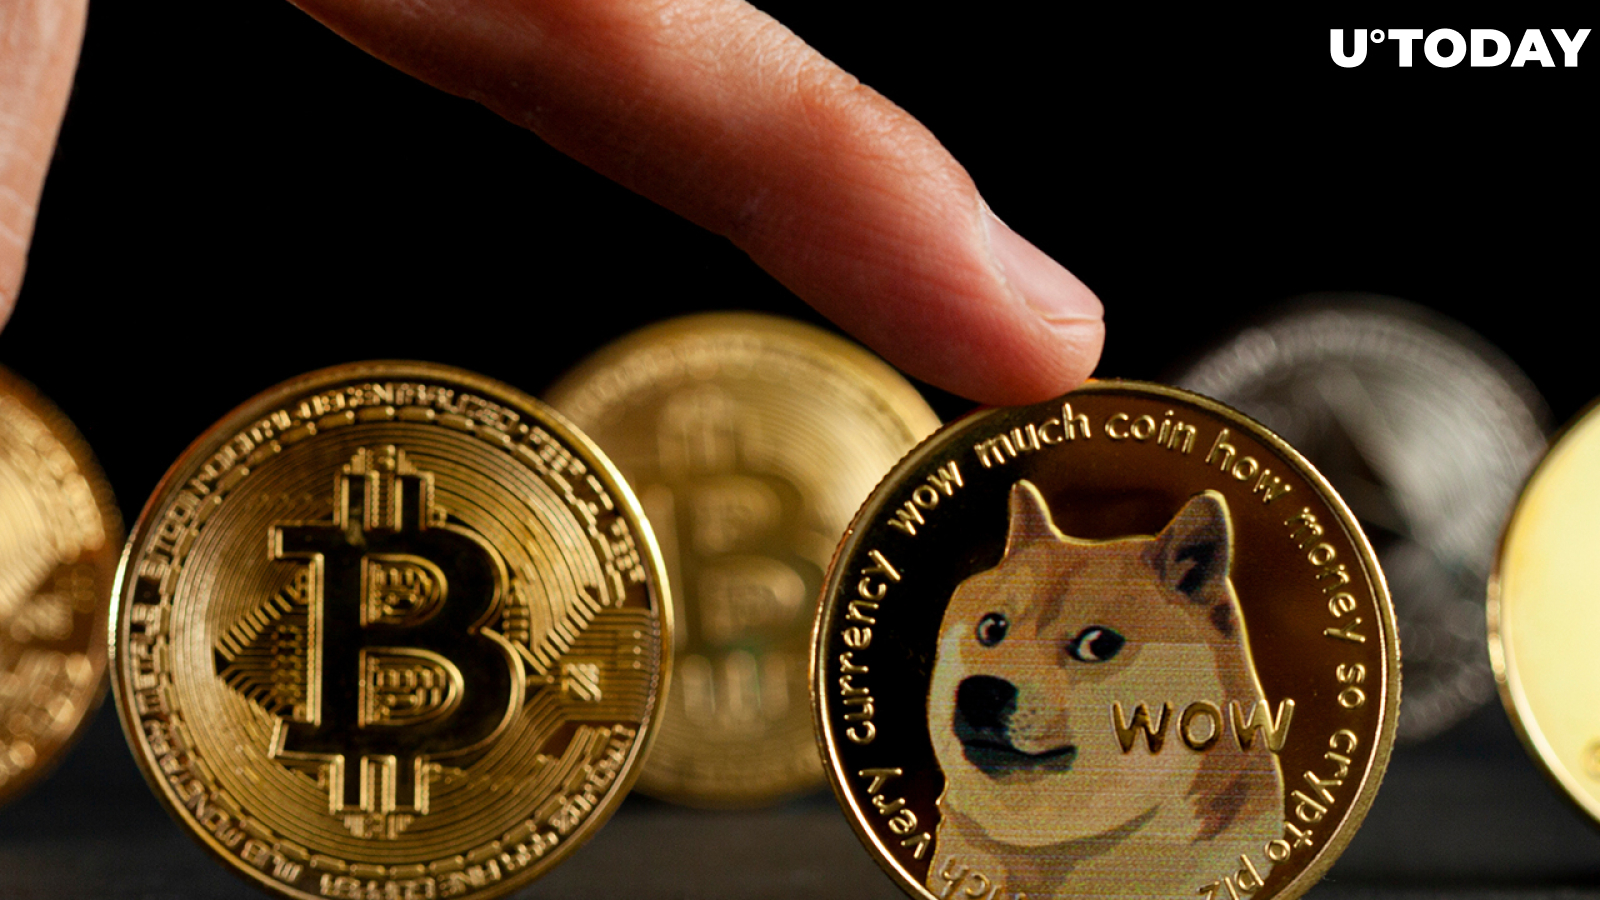 Dogecoin-Accepting Luxury Brand Seeing Demand for Crypto Payments